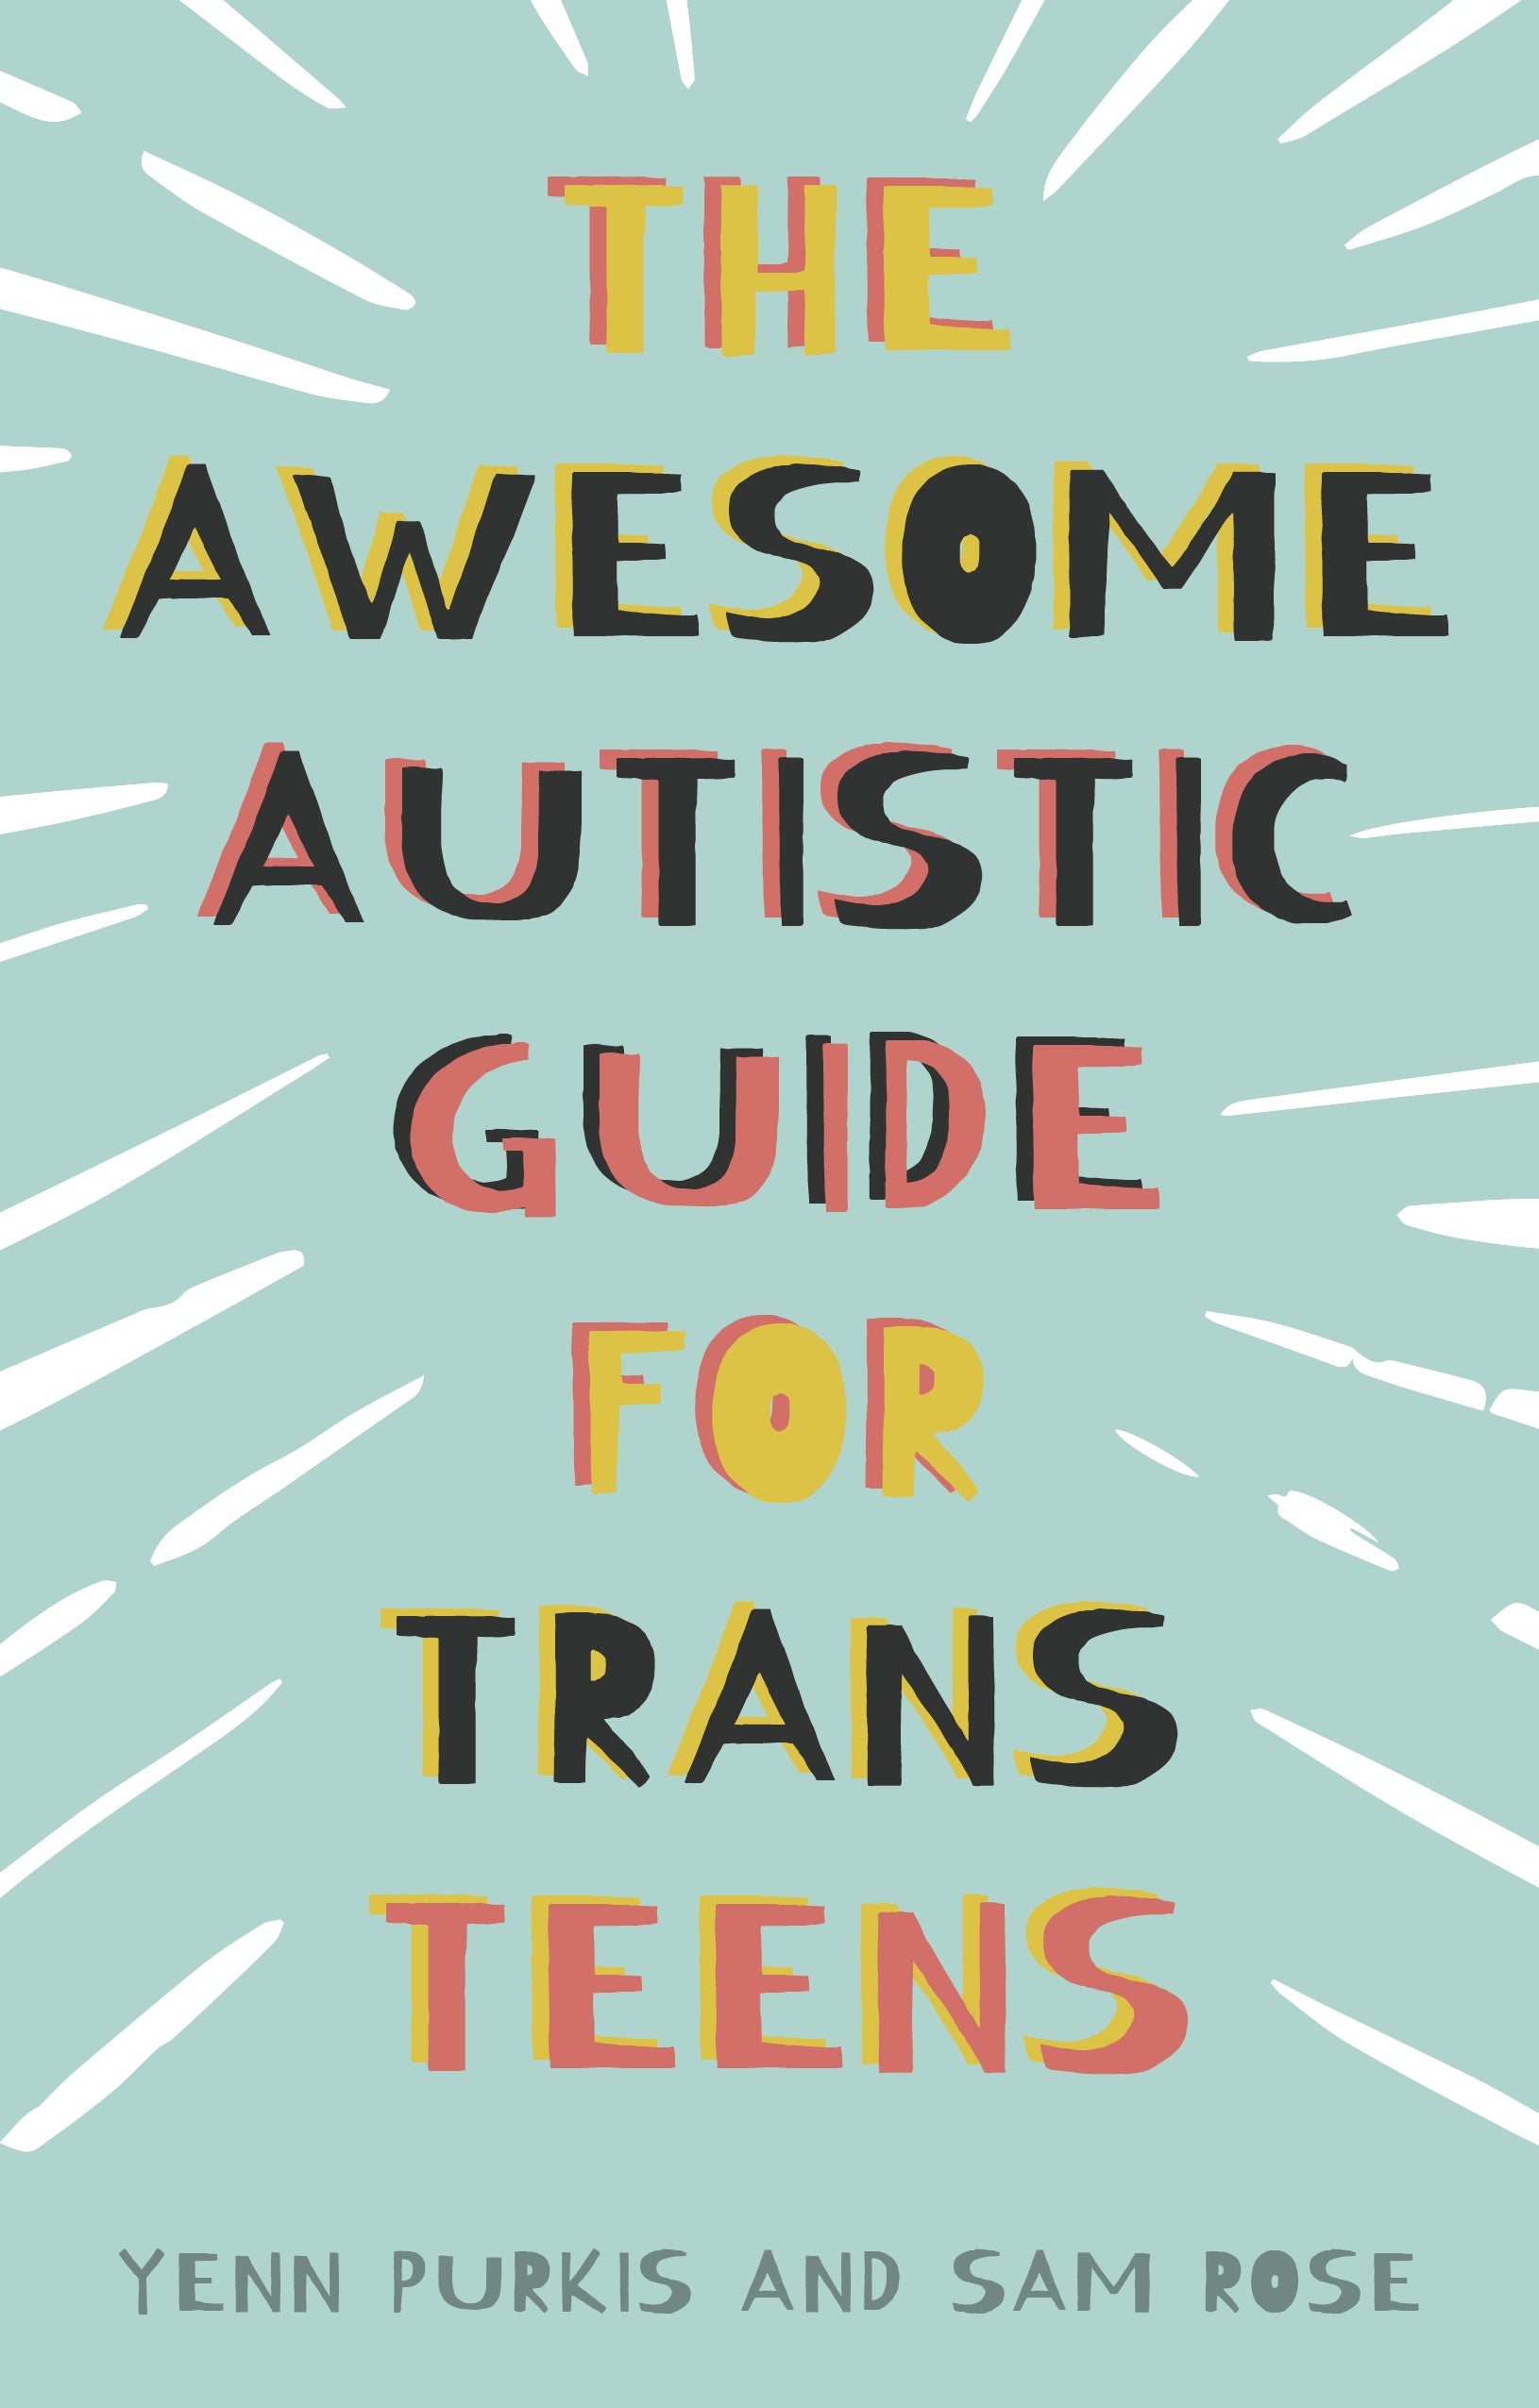 The Awesome Autistic Guide for Trans Teens by Glynn Masterman, Yenn Purkis, Sam Rose